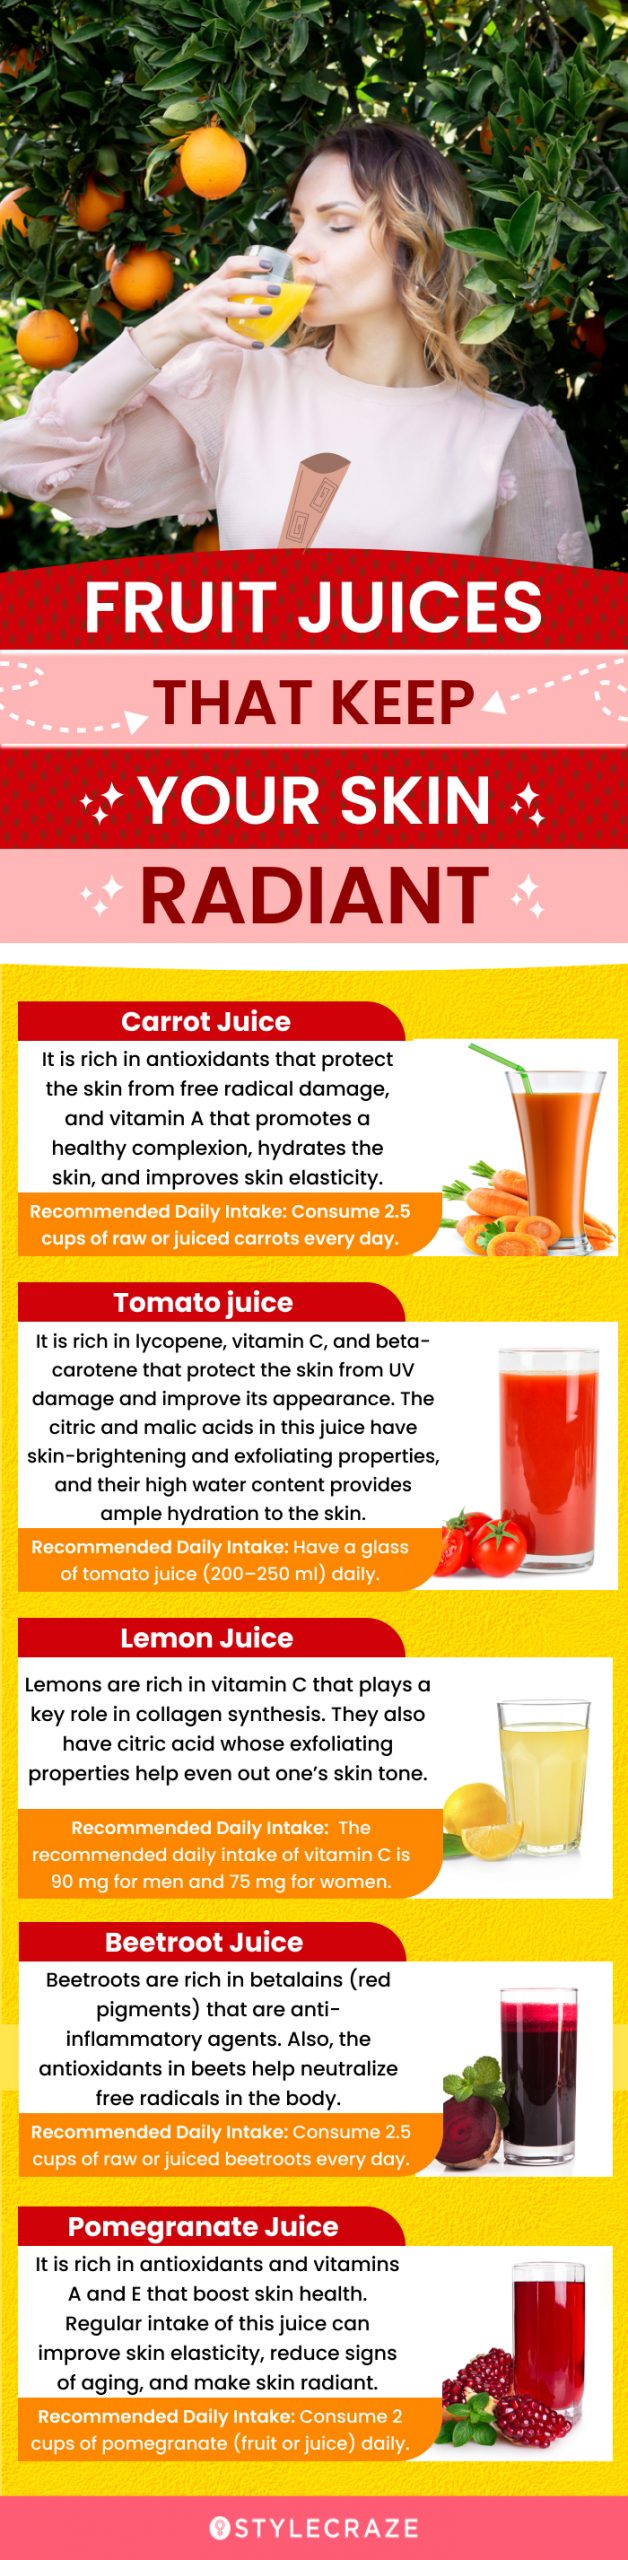 fruit juices that keep your skin radiant (infographic)